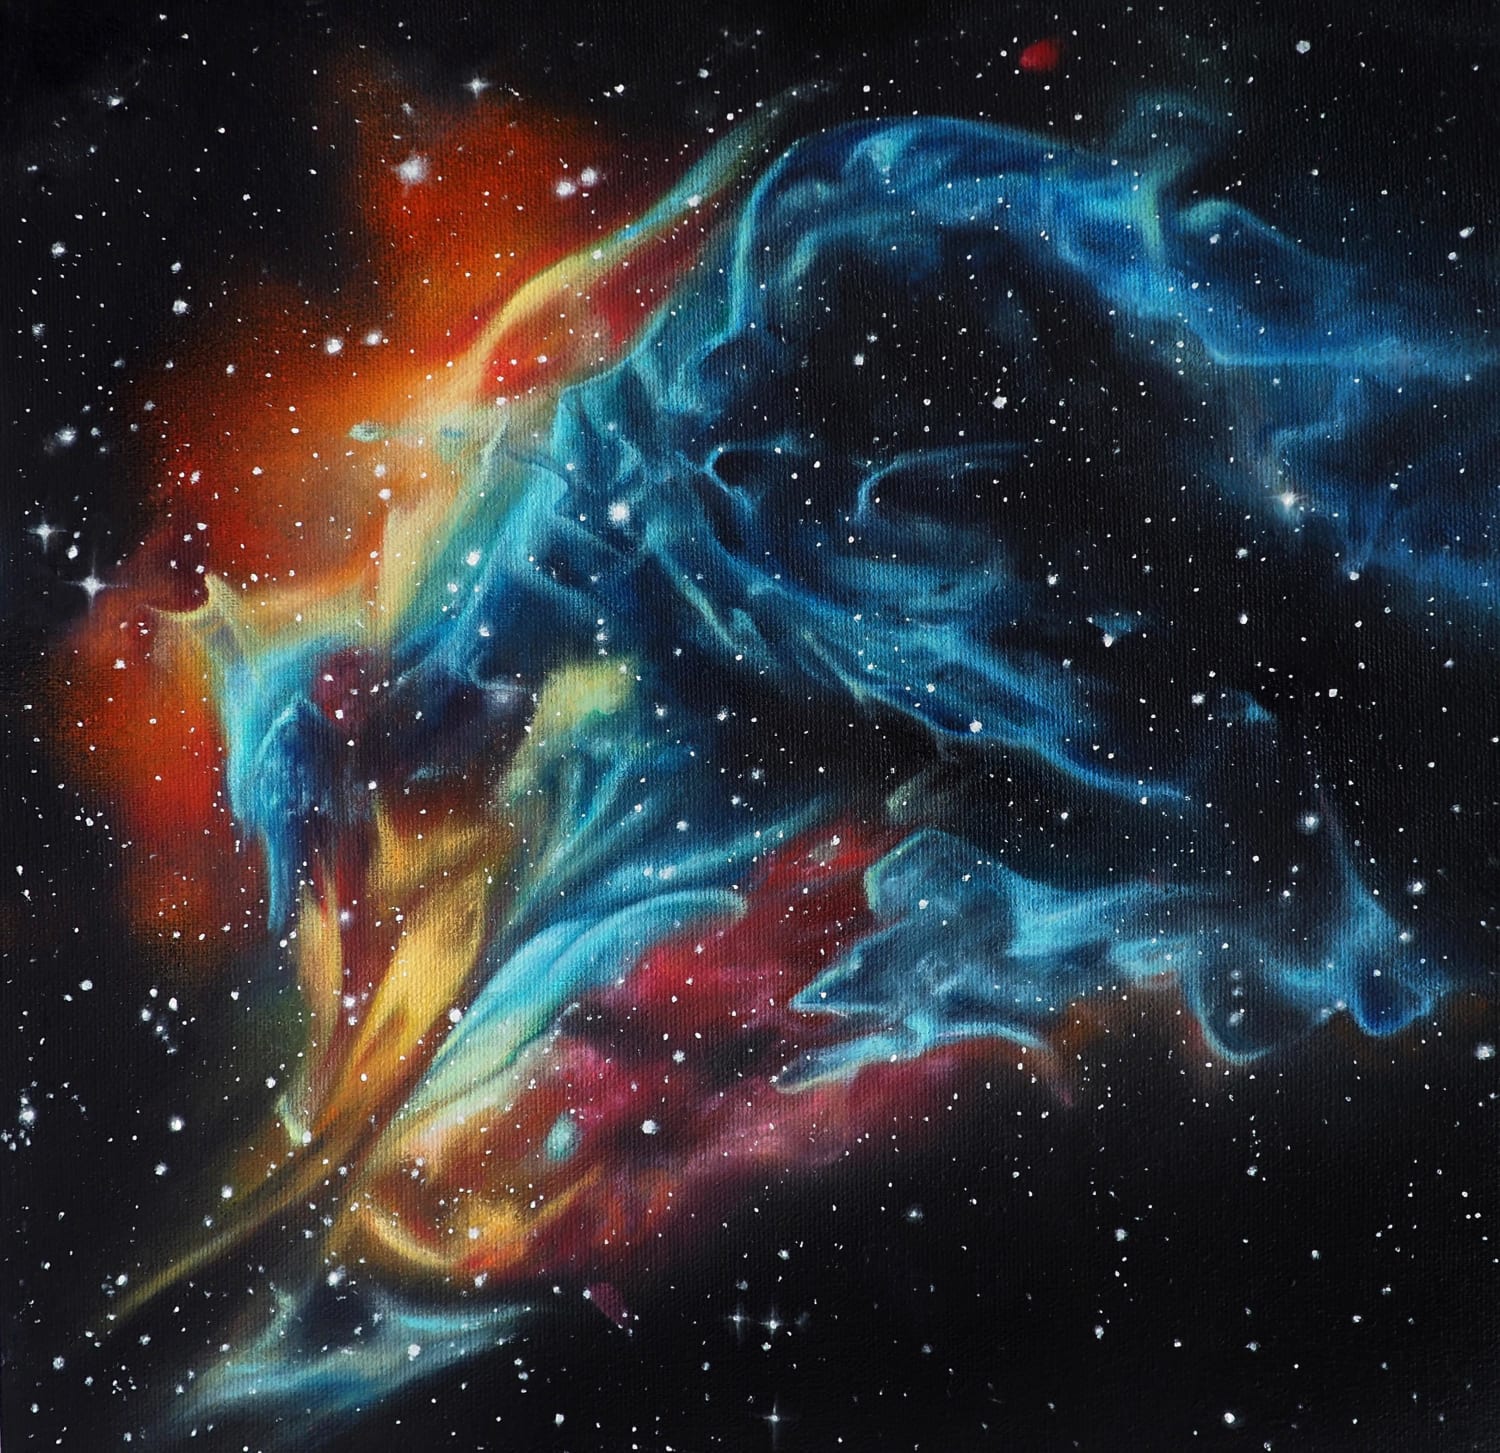 An oil painting I made of the NGC 3572, an Open Cluster in the Carina constellation